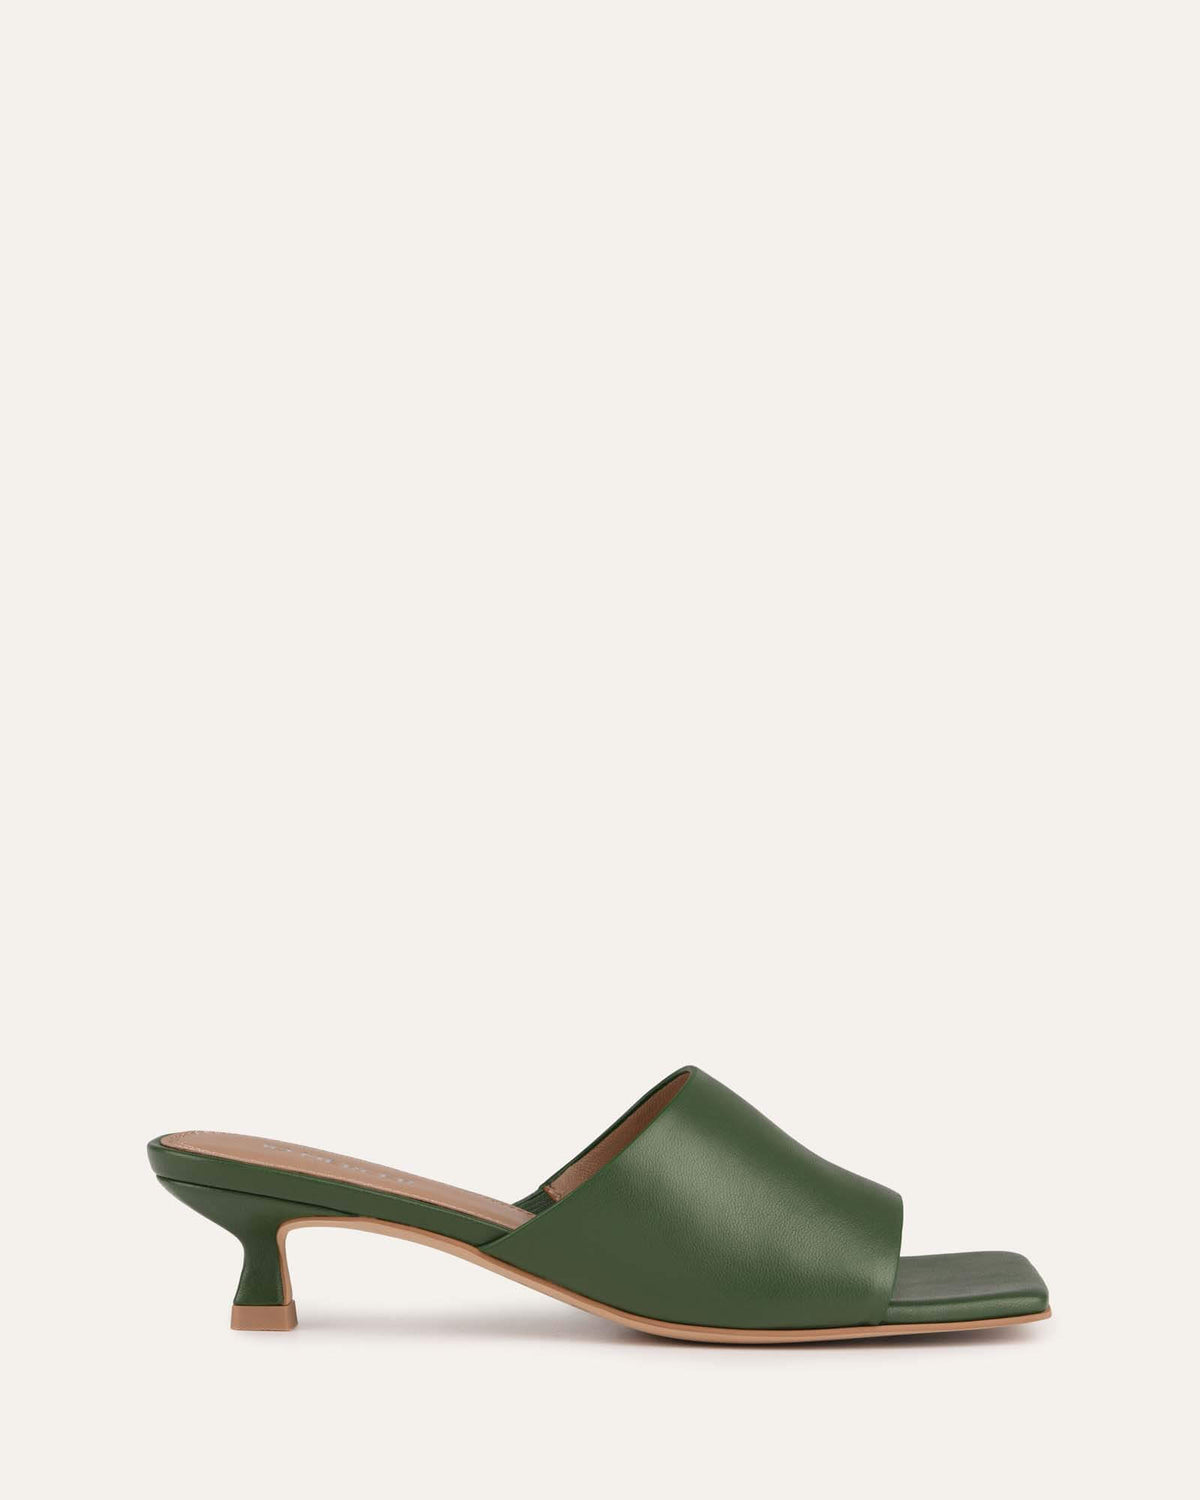 MAEVE MID HEEL SANDALS MOSS GREEN LEATHER